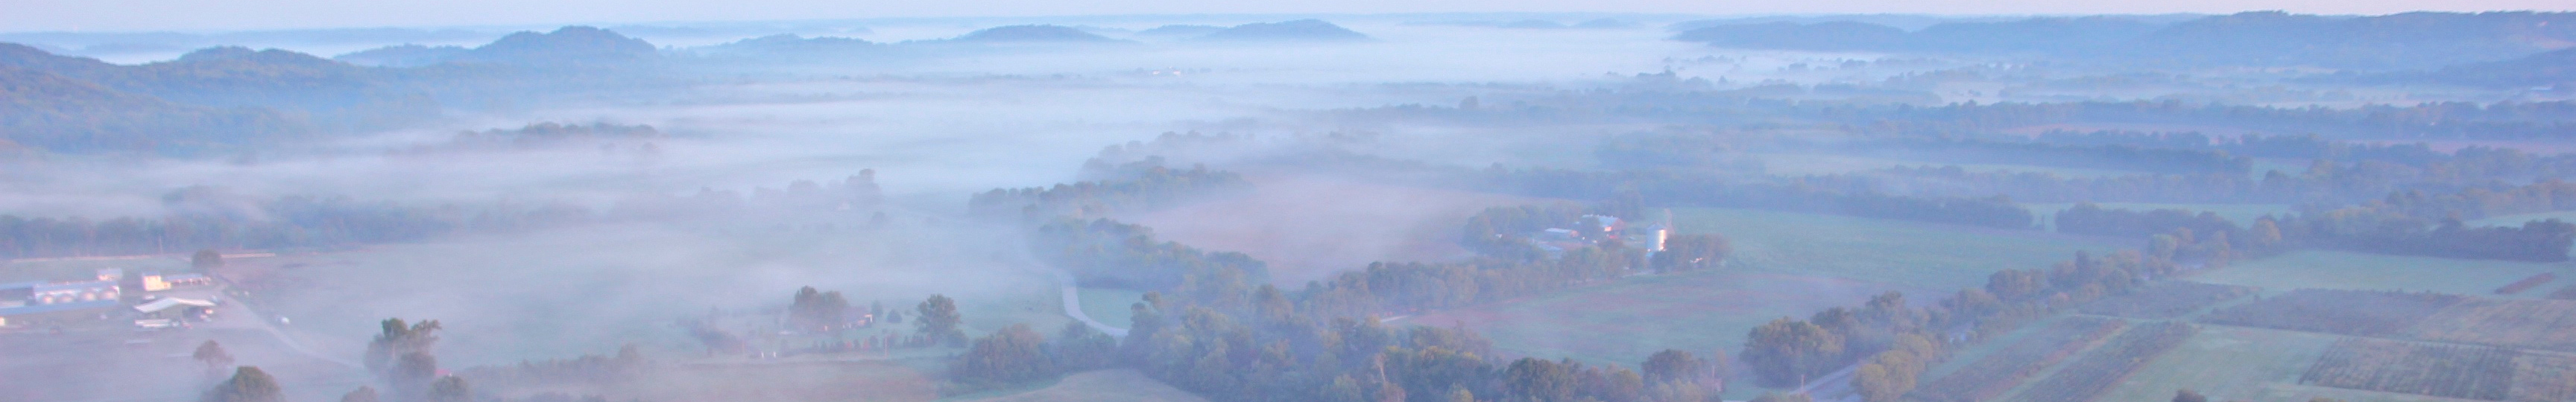 A foggy morning view of patches of farm land separated by trees